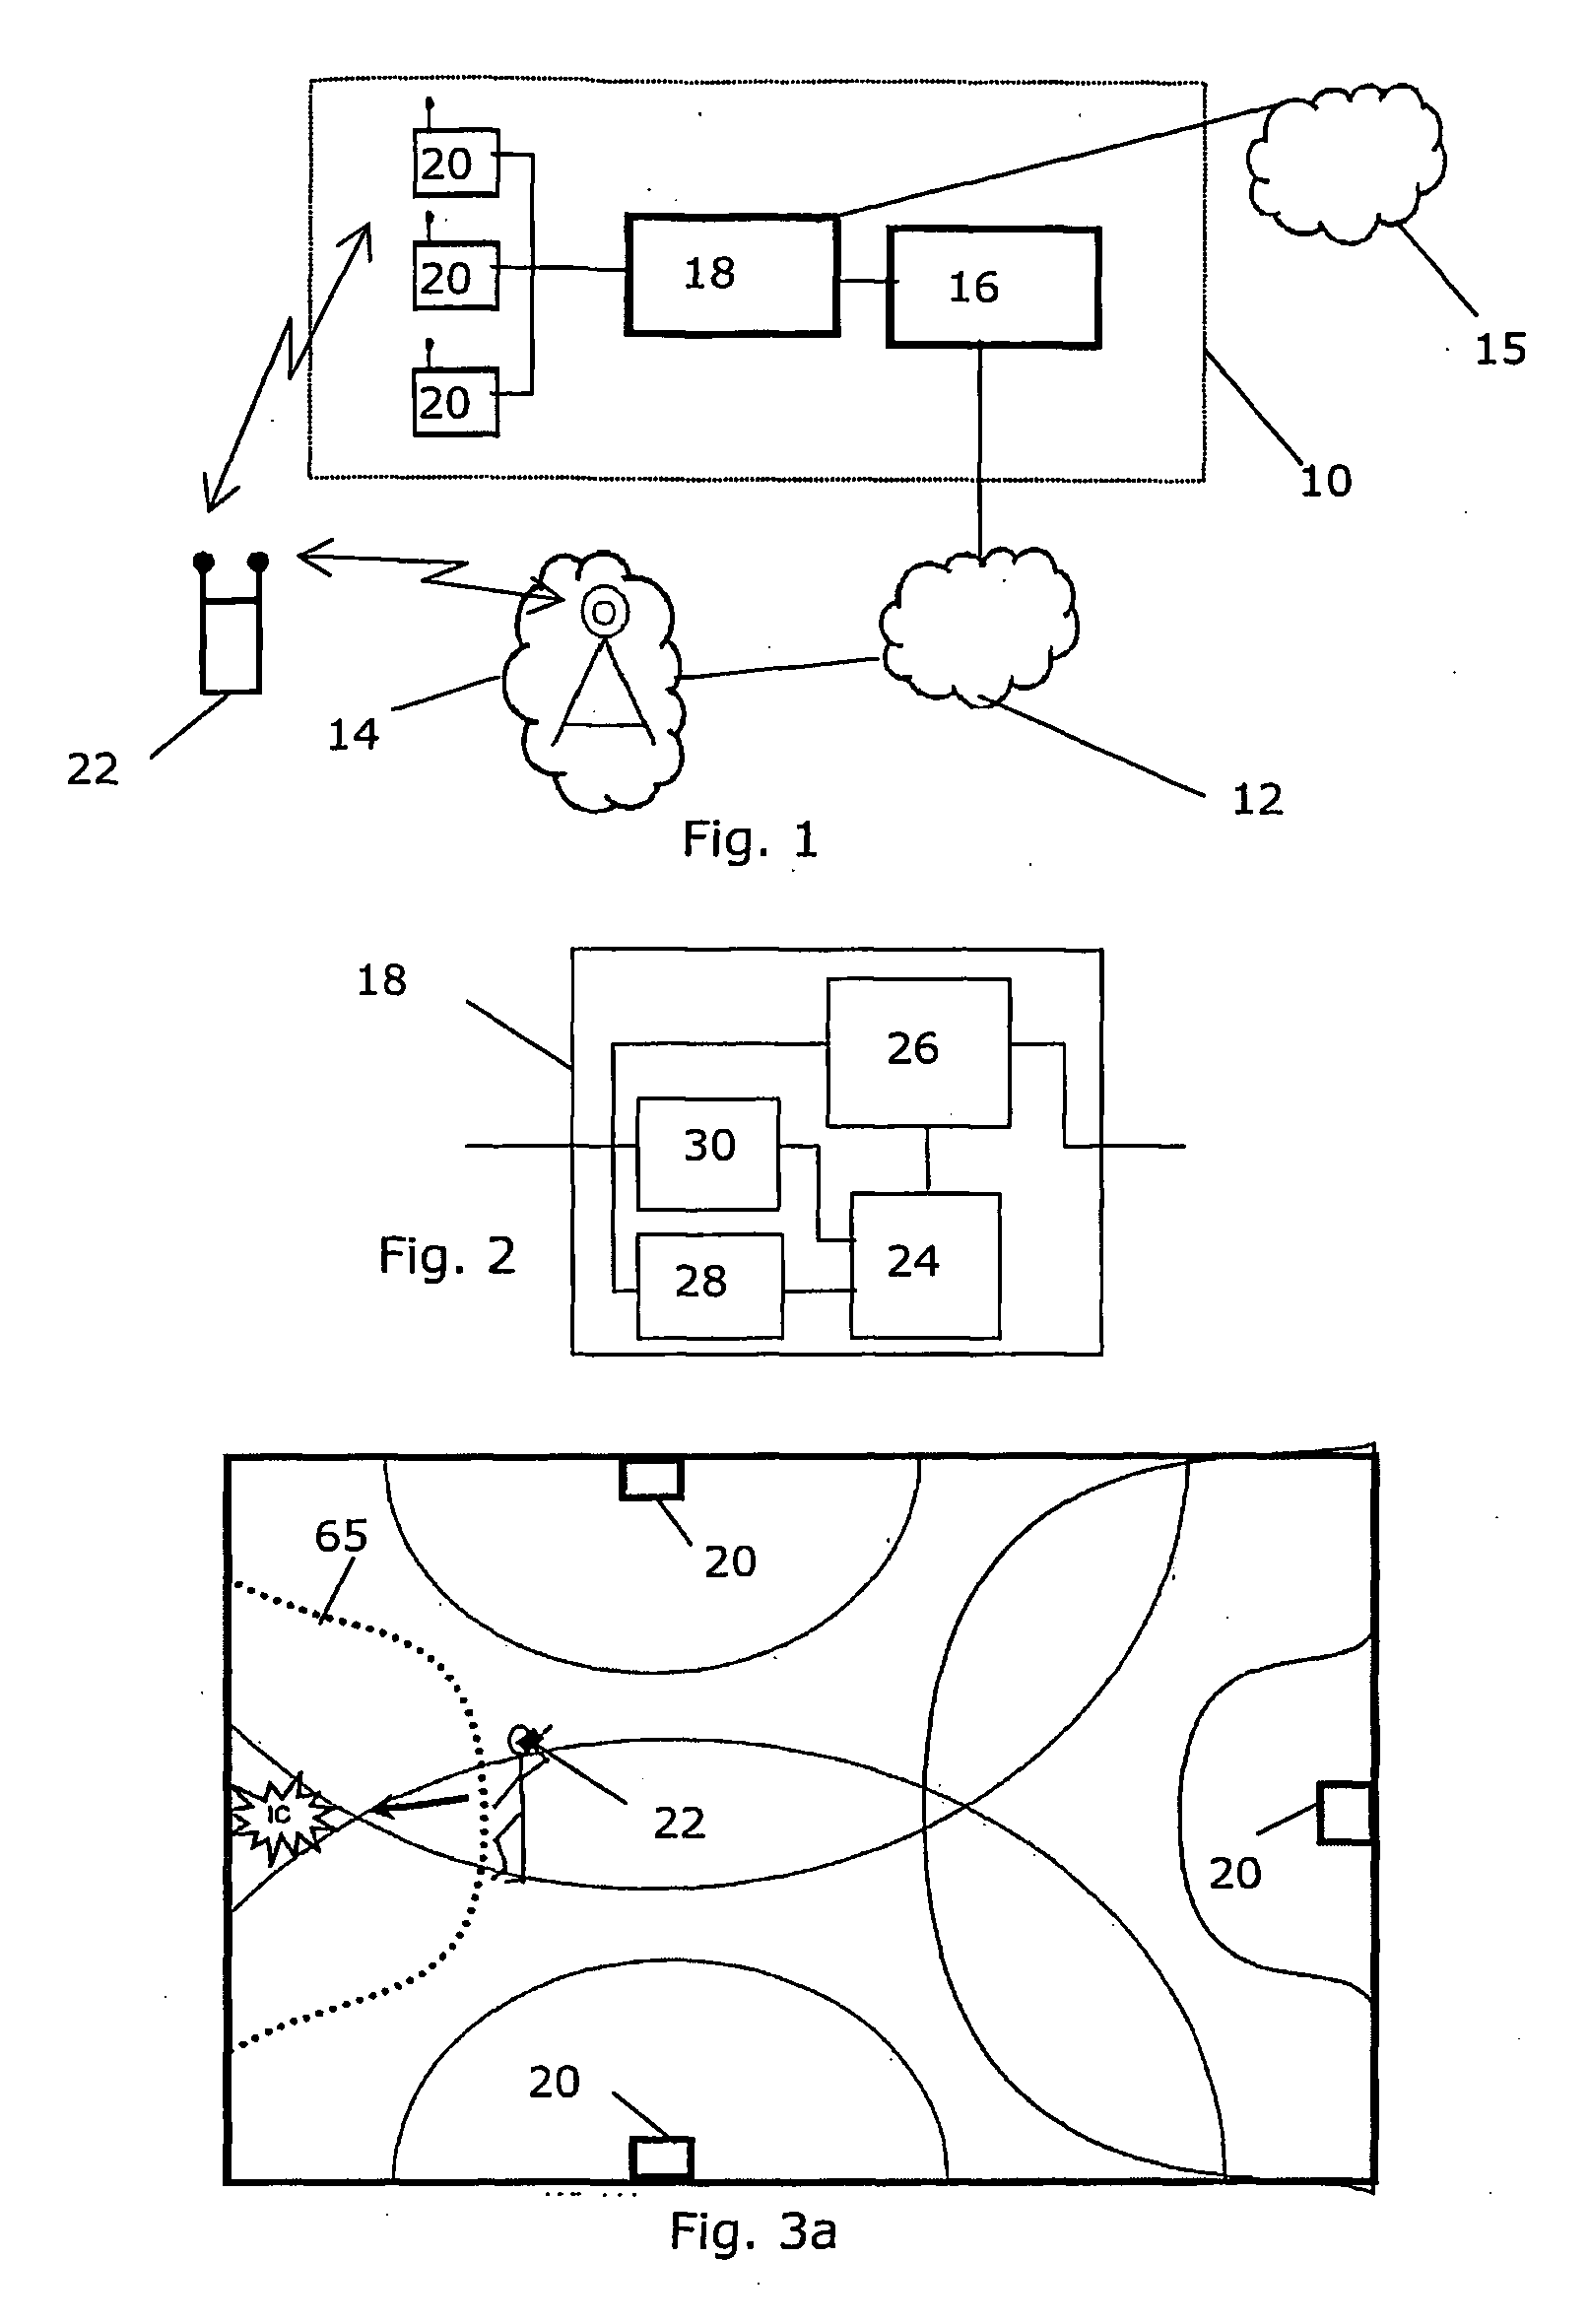 Handover for a portable communication device between wireless local and wide area networks